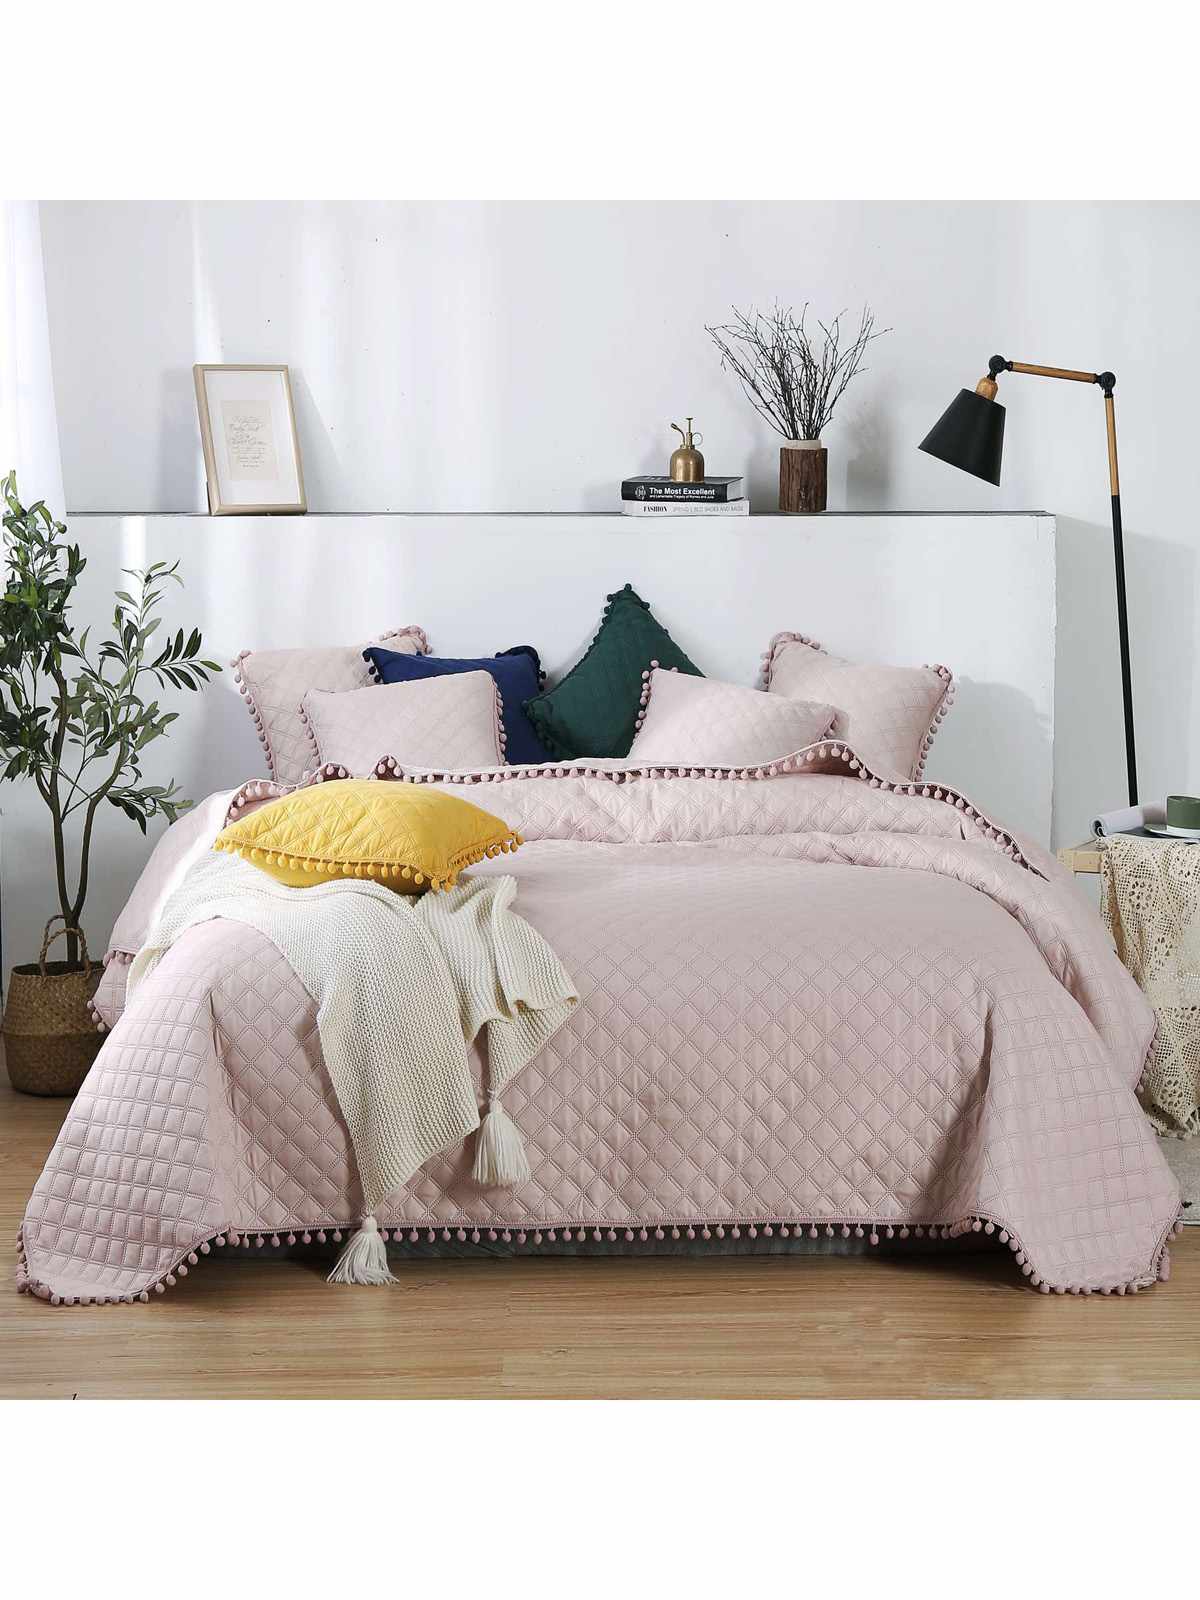 Edoti Quilted bedspread Pompoo